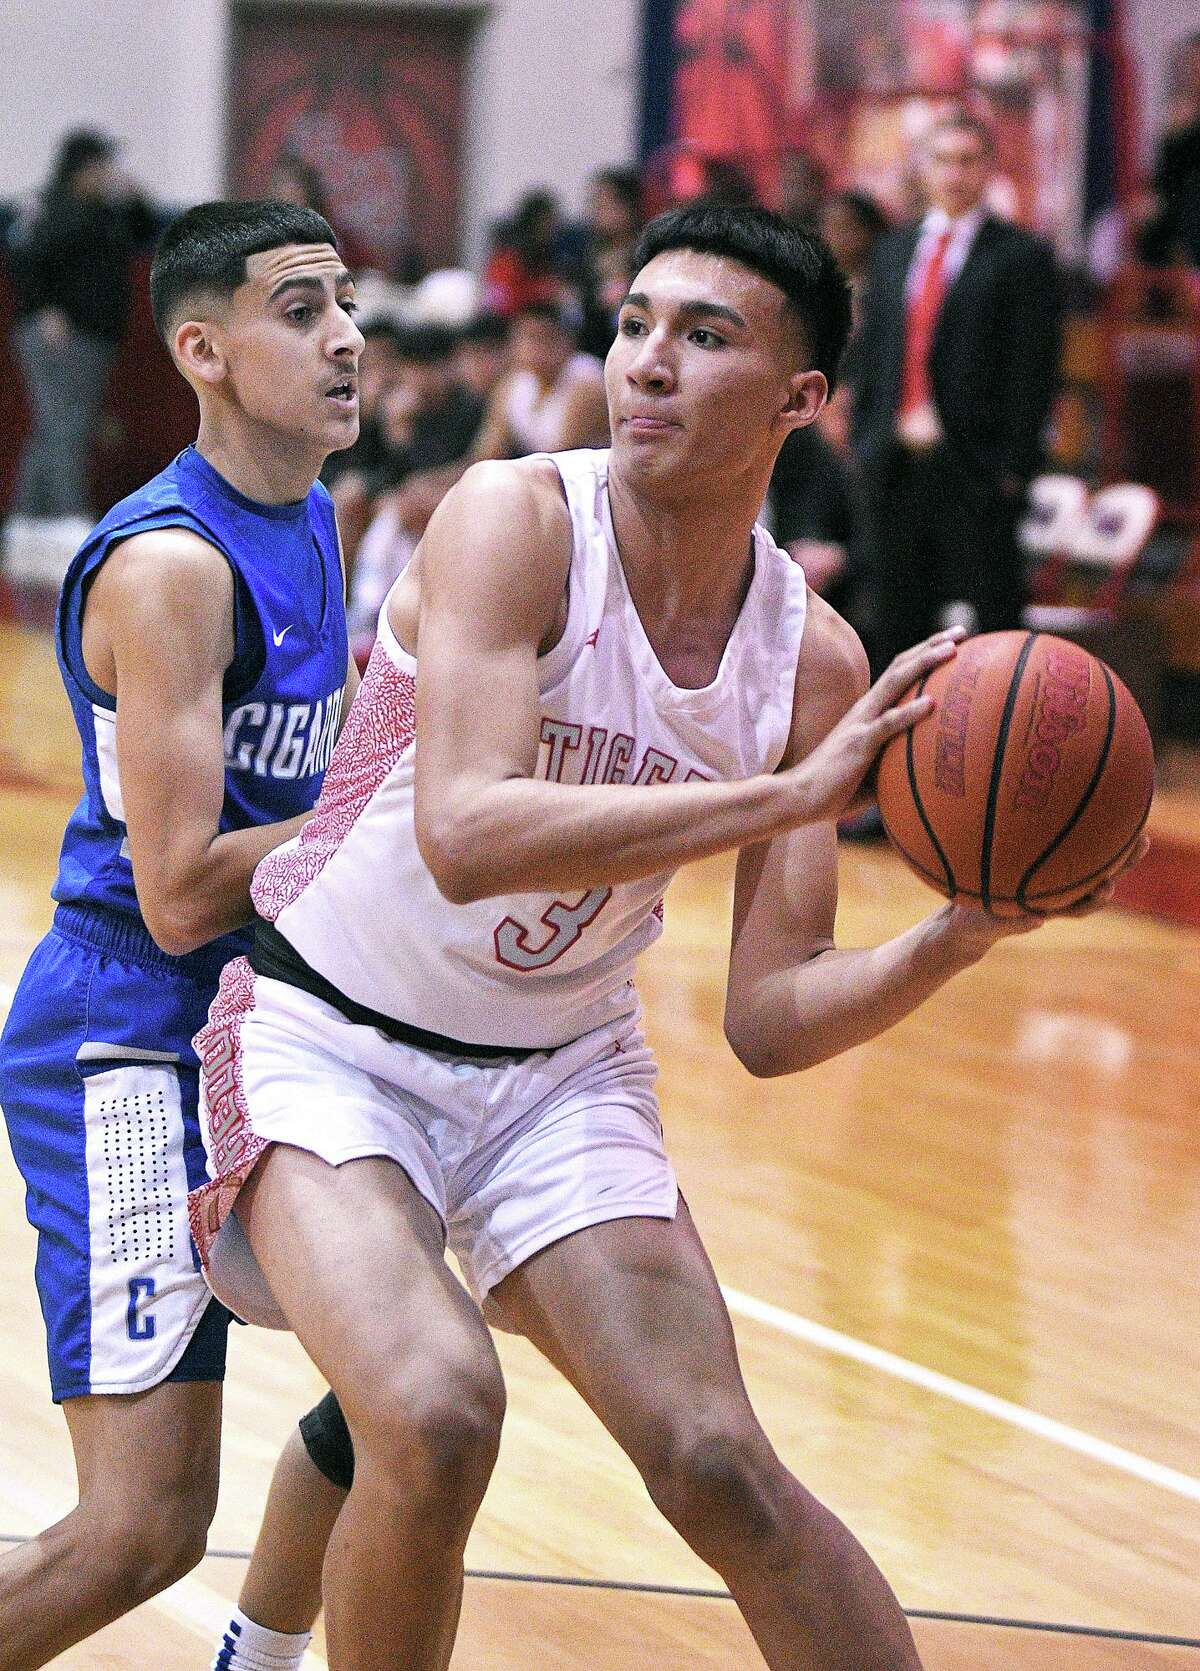 Kevin Garcia and the Martin Tigers are set to compete at the I-35 Showdown this weekend.